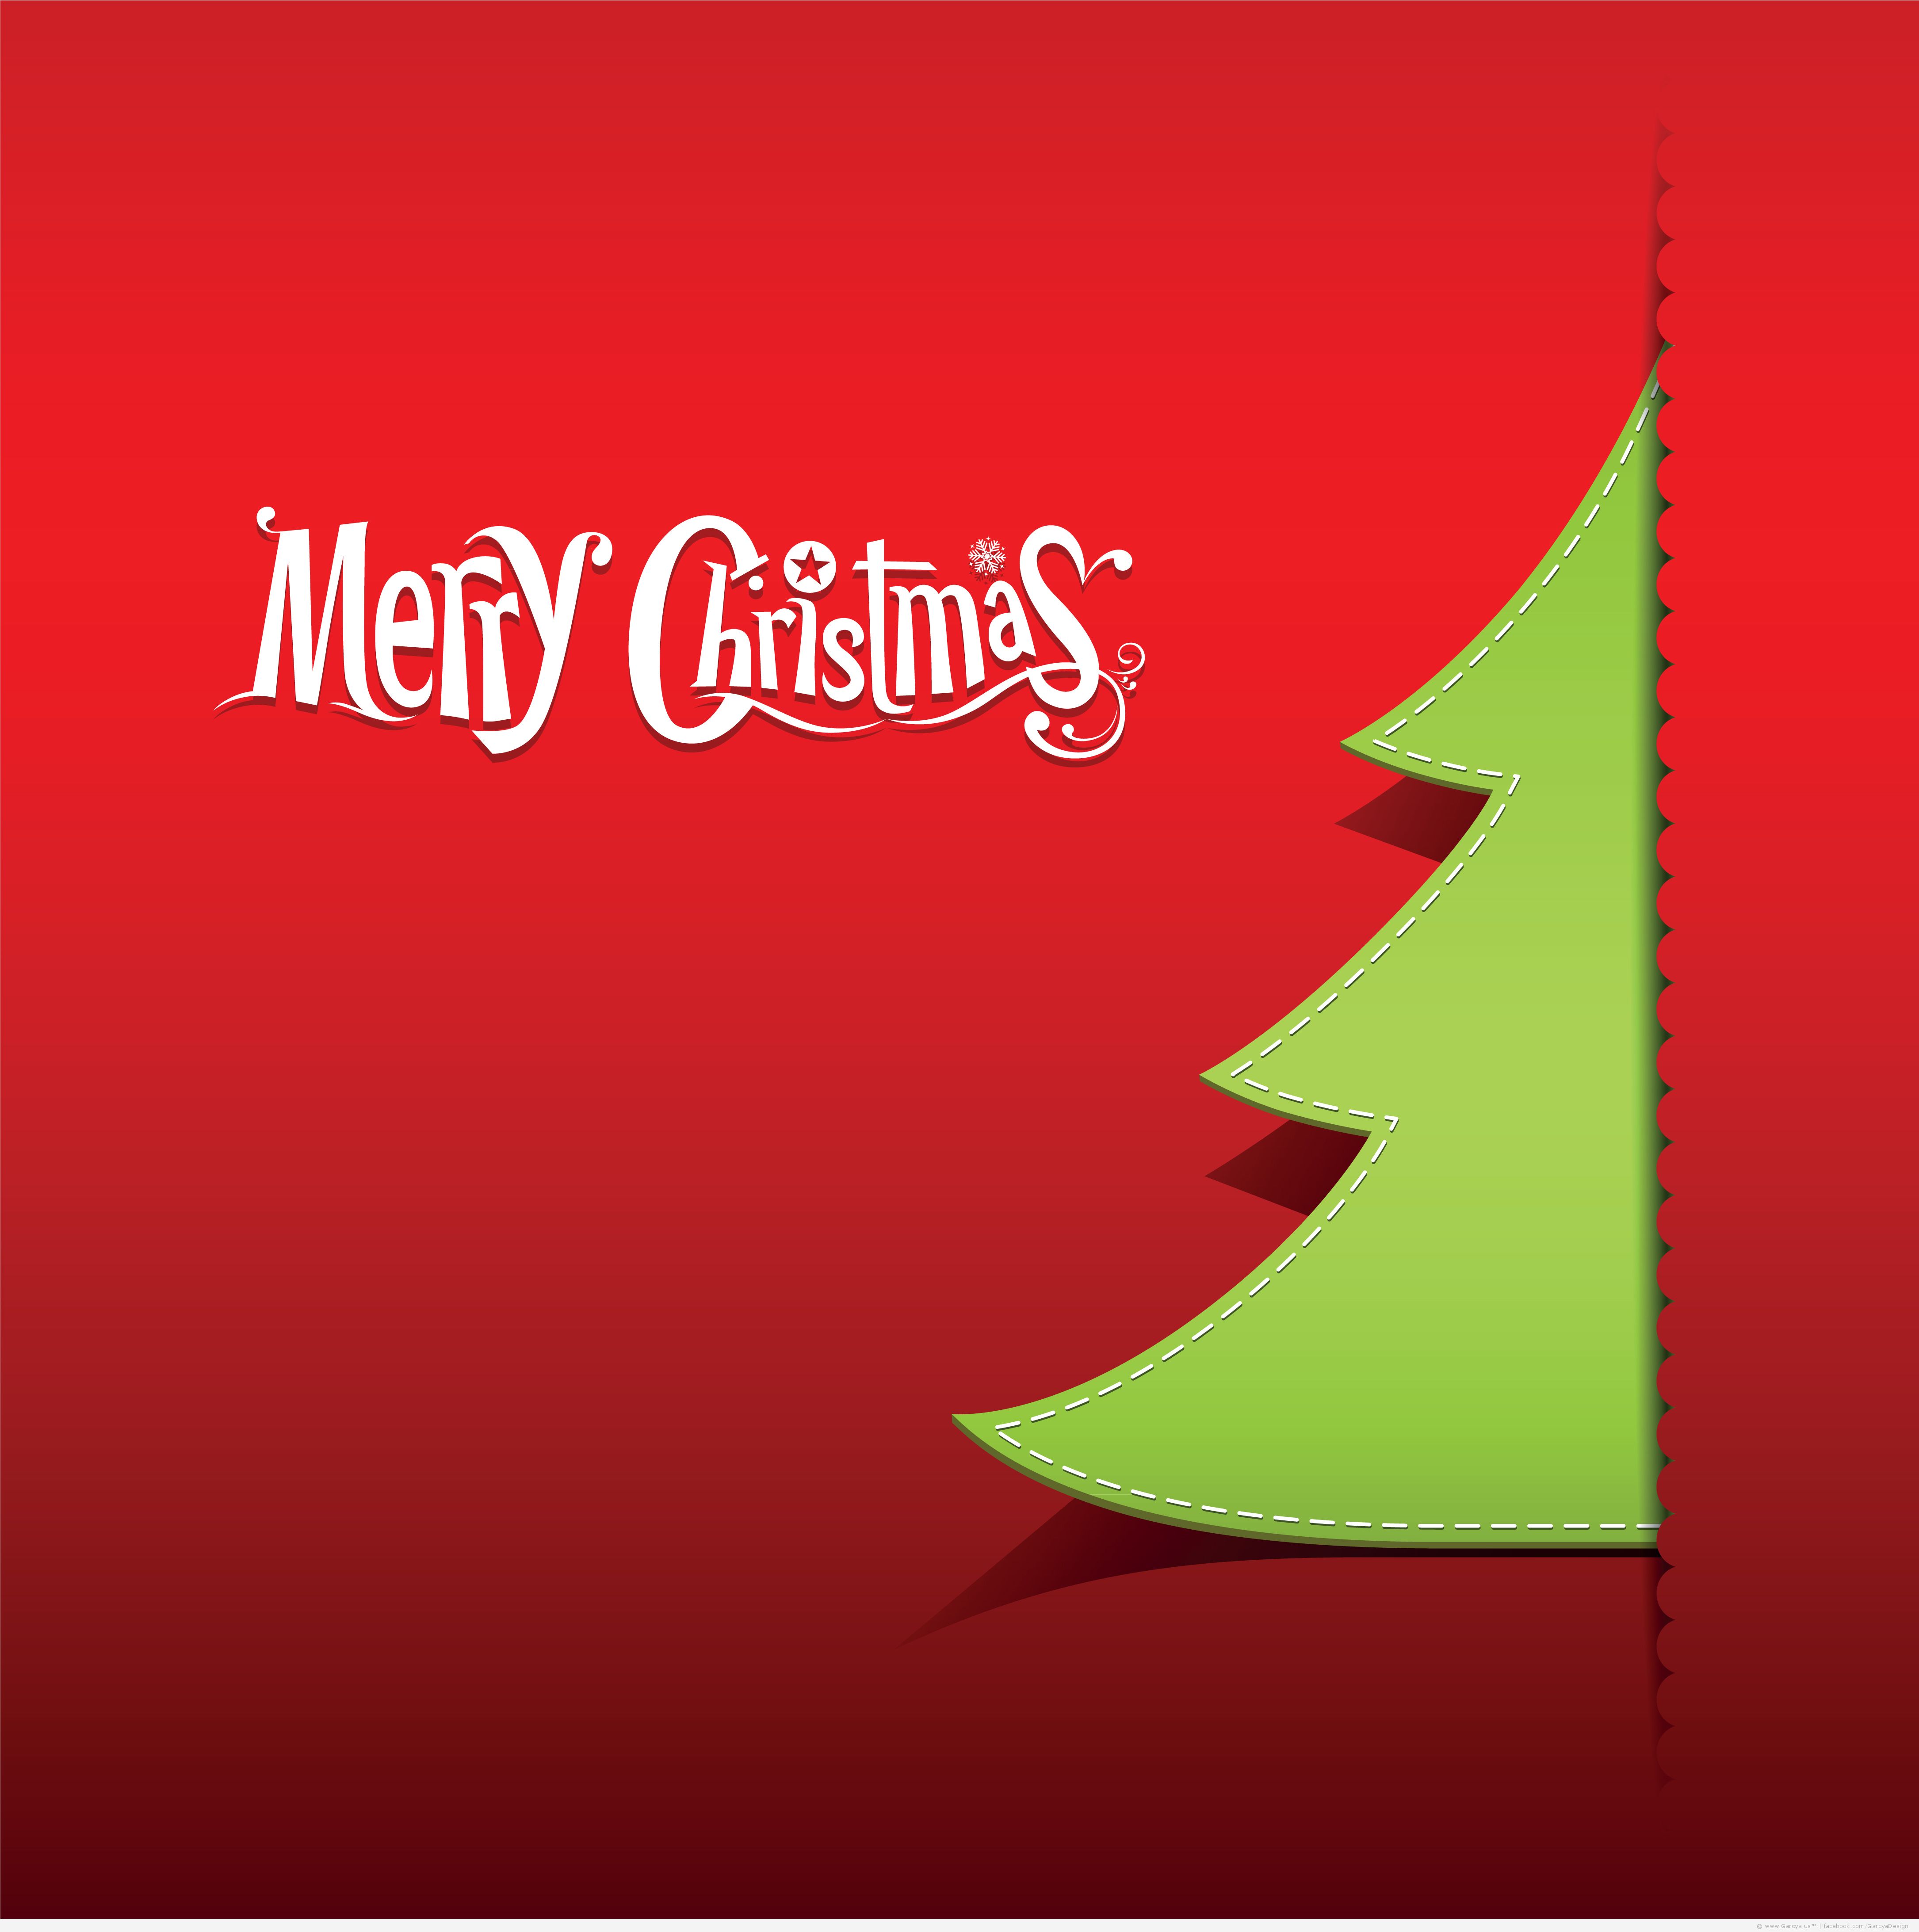 vector free download merry christmas - photo #5